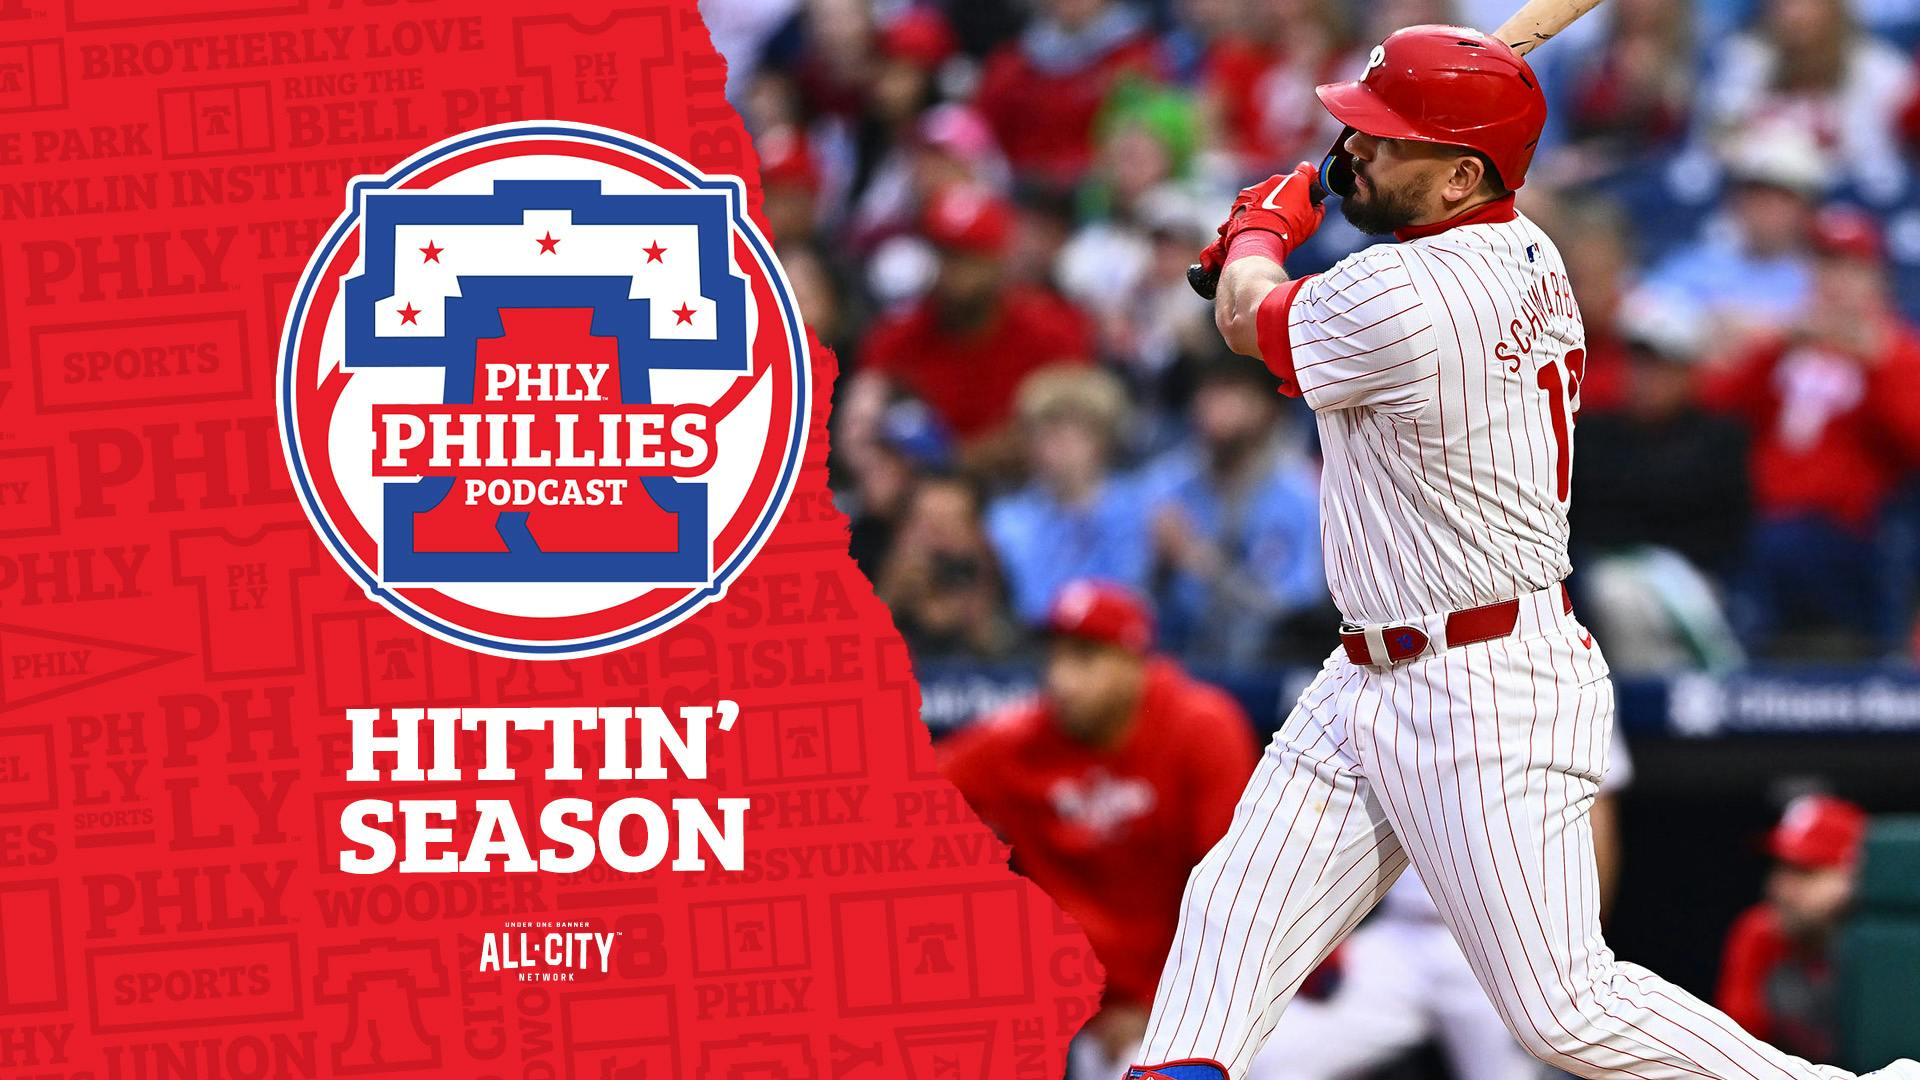 PHLY Phillies Podcast | Is it Hitting season? Kyle Schwarber hits 2 home runs as Phillies bats warm up to sweep the Rockies